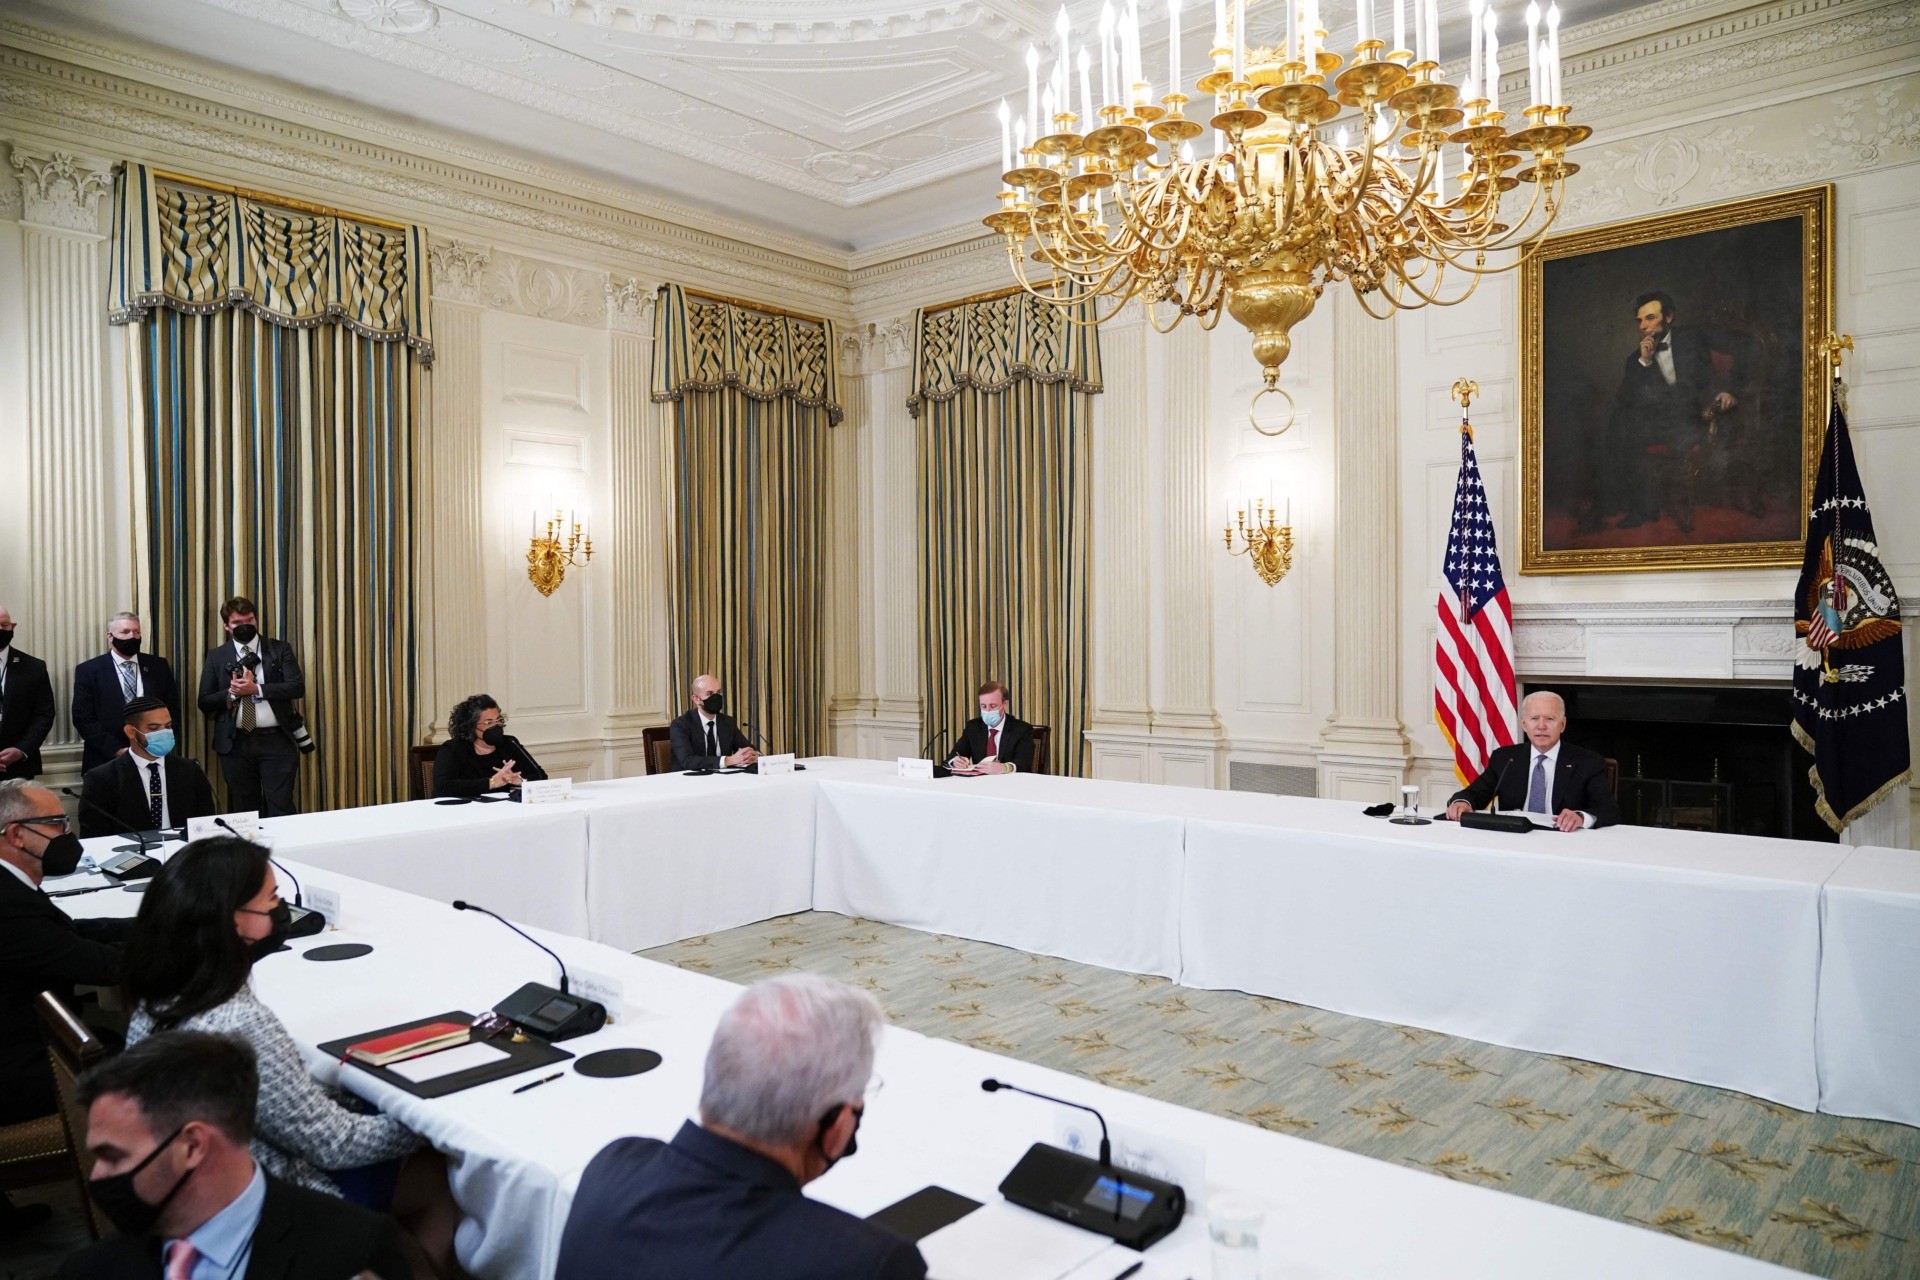 US President Joe Biden speaks during a meeting with Cuban-American leaders in the State Dining Room of the White House in Washington, DC on July 30, 2021. - The US Treasury announced sanctions July 30, 2021 on two top Cuban police officials as well as the country's entire National Revolutionary Police for their roles in suppressing anti-government demonstrations that began July 11. (Photo by MANDEL NGAN / AFP) (Photo by MANDEL NGAN/AFP via Getty Images)